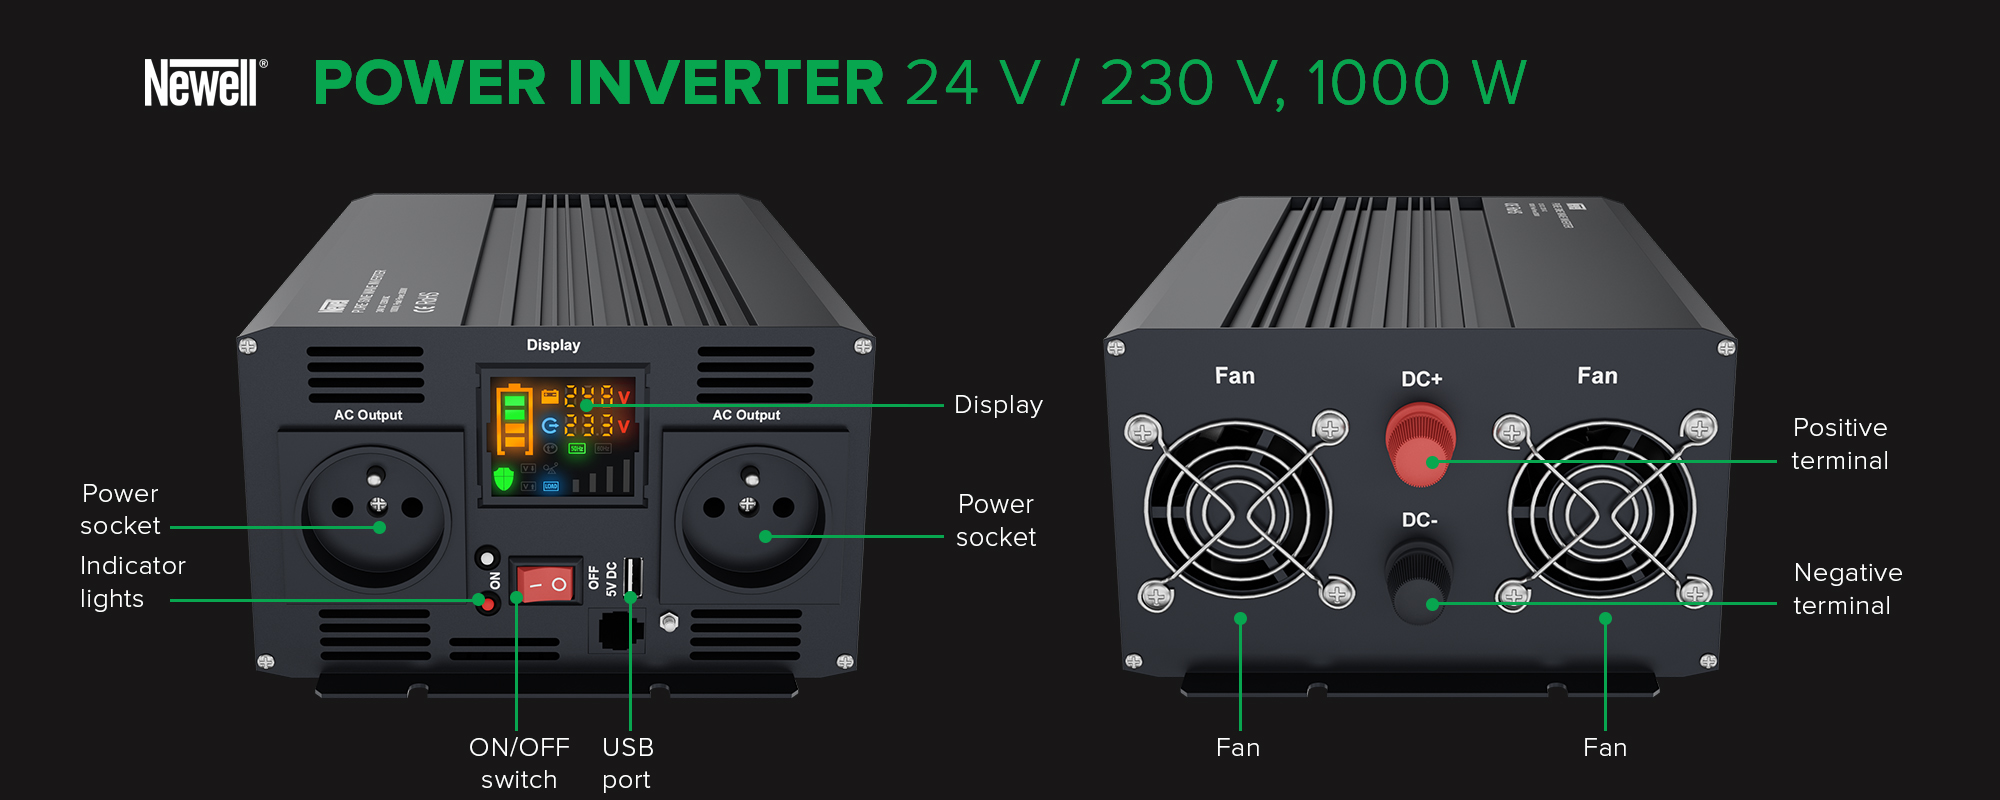 Newell voltage converter with pure sine wave - 24 V _ 230 V, 1000 W